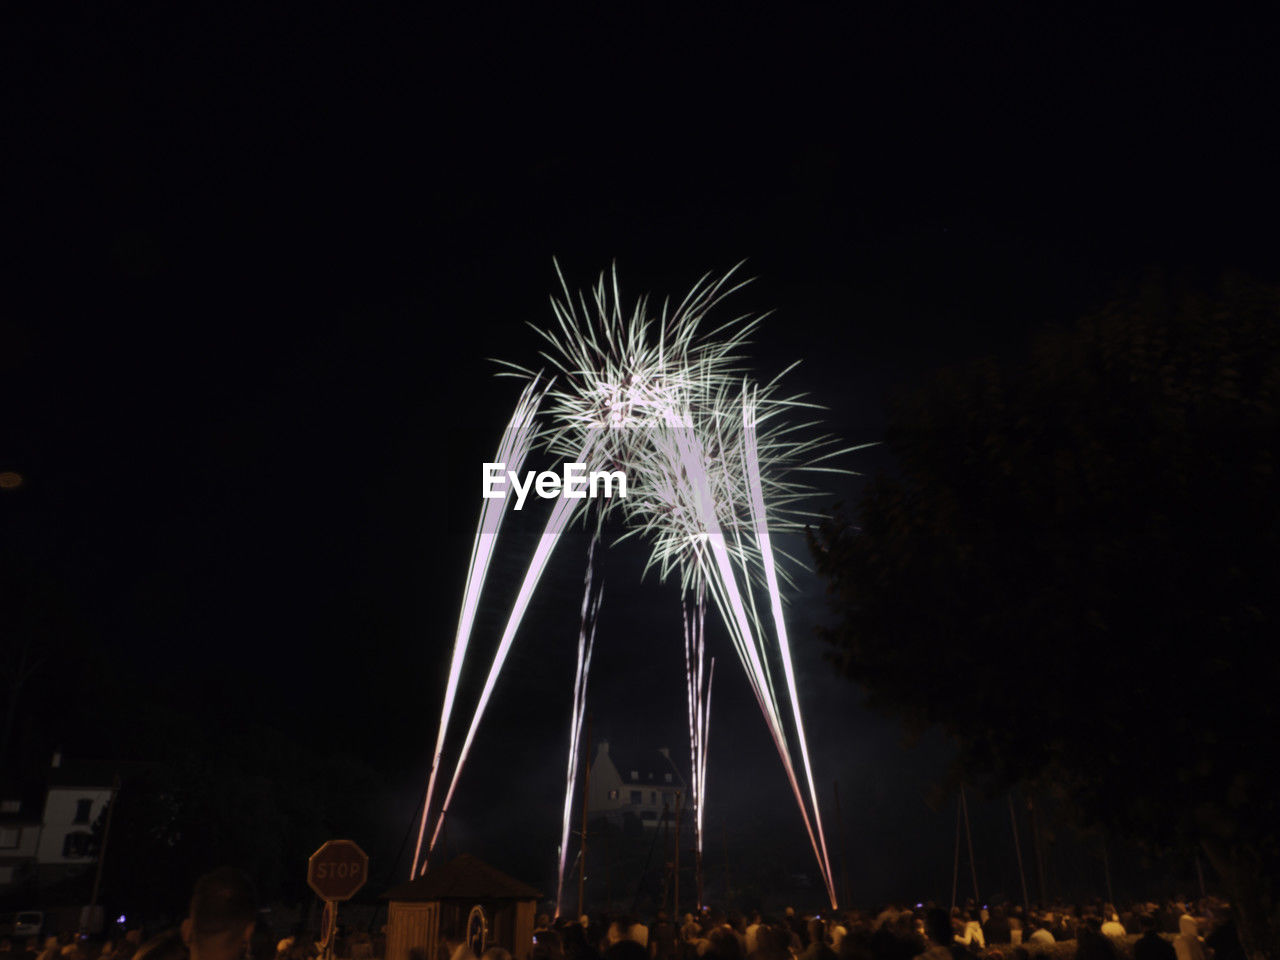 fireworks, celebration, night, event, illuminated, firework display, arts culture and entertainment, motion, exploding, recreation, firework - man made object, sky, long exposure, nature, new year's eve, outdoors, glowing, architecture, group of people, dark